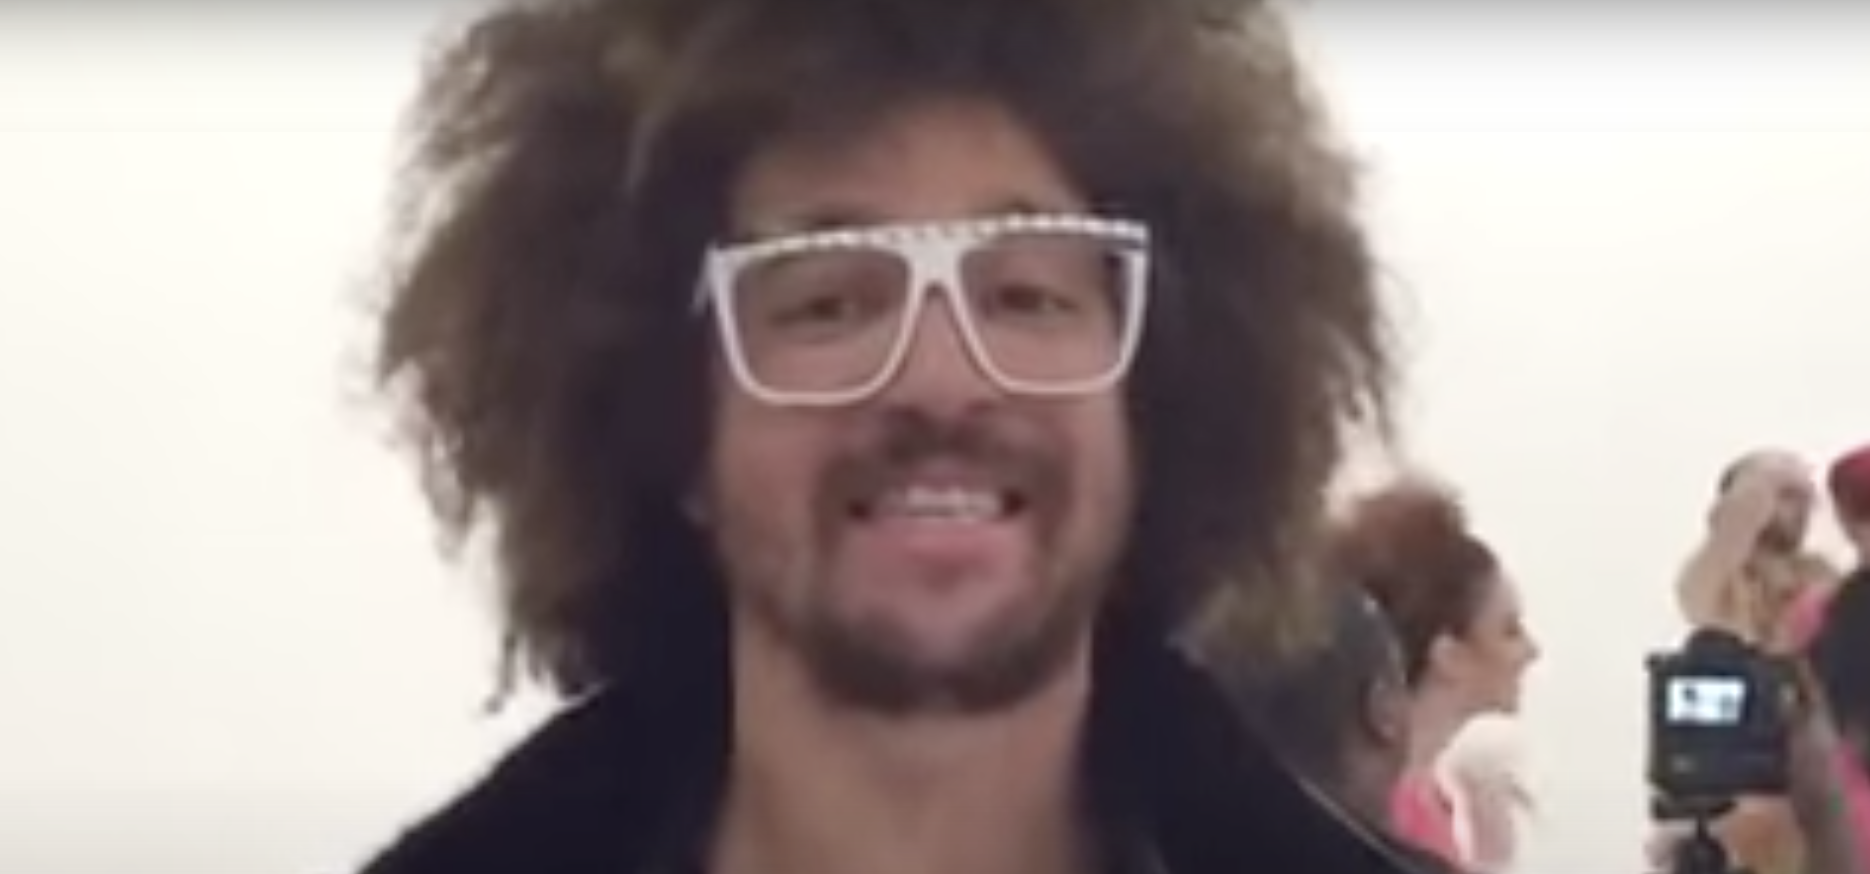  Redfoo Shout-out to Thunder Studios